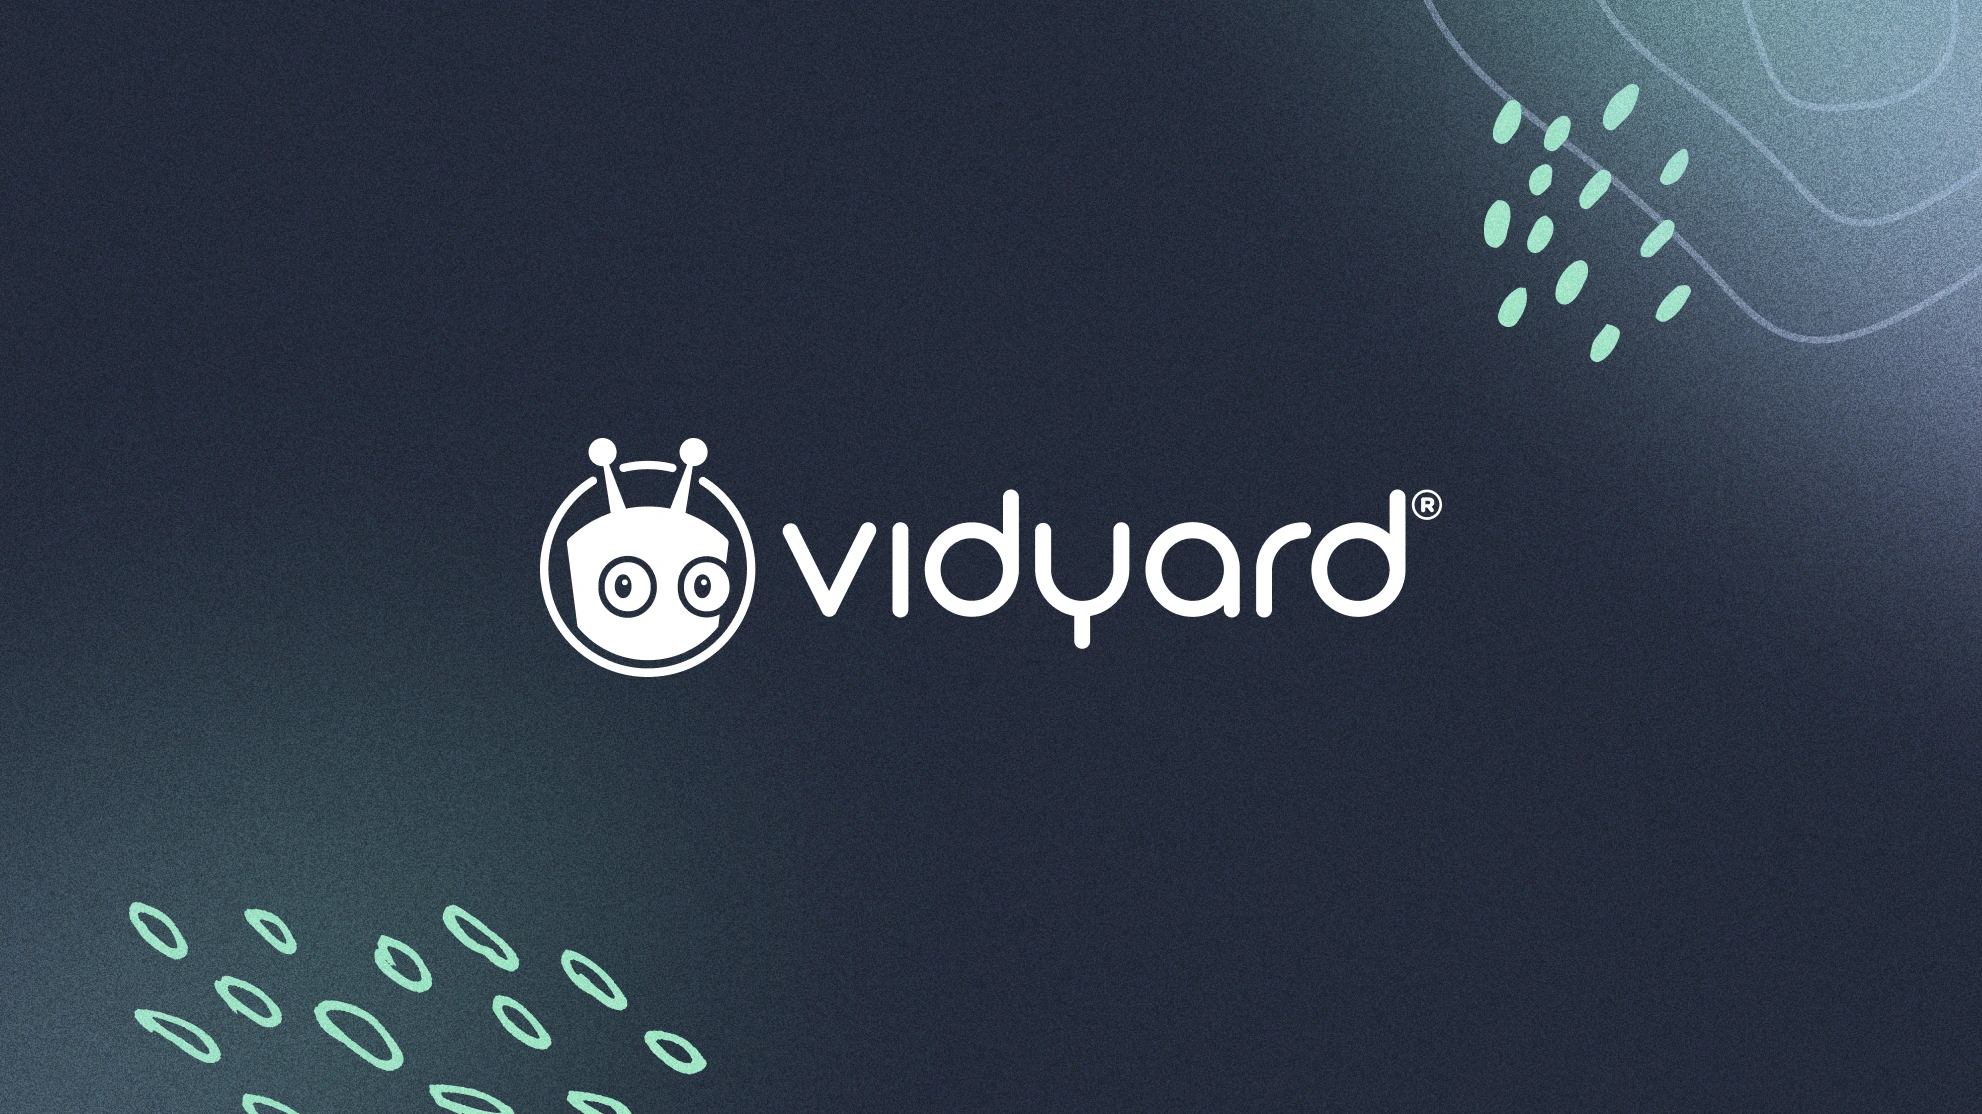 Vidyard Raises $18M from Bessemer Venture Partners and Other Investors to Fuel Video Marketing Industry